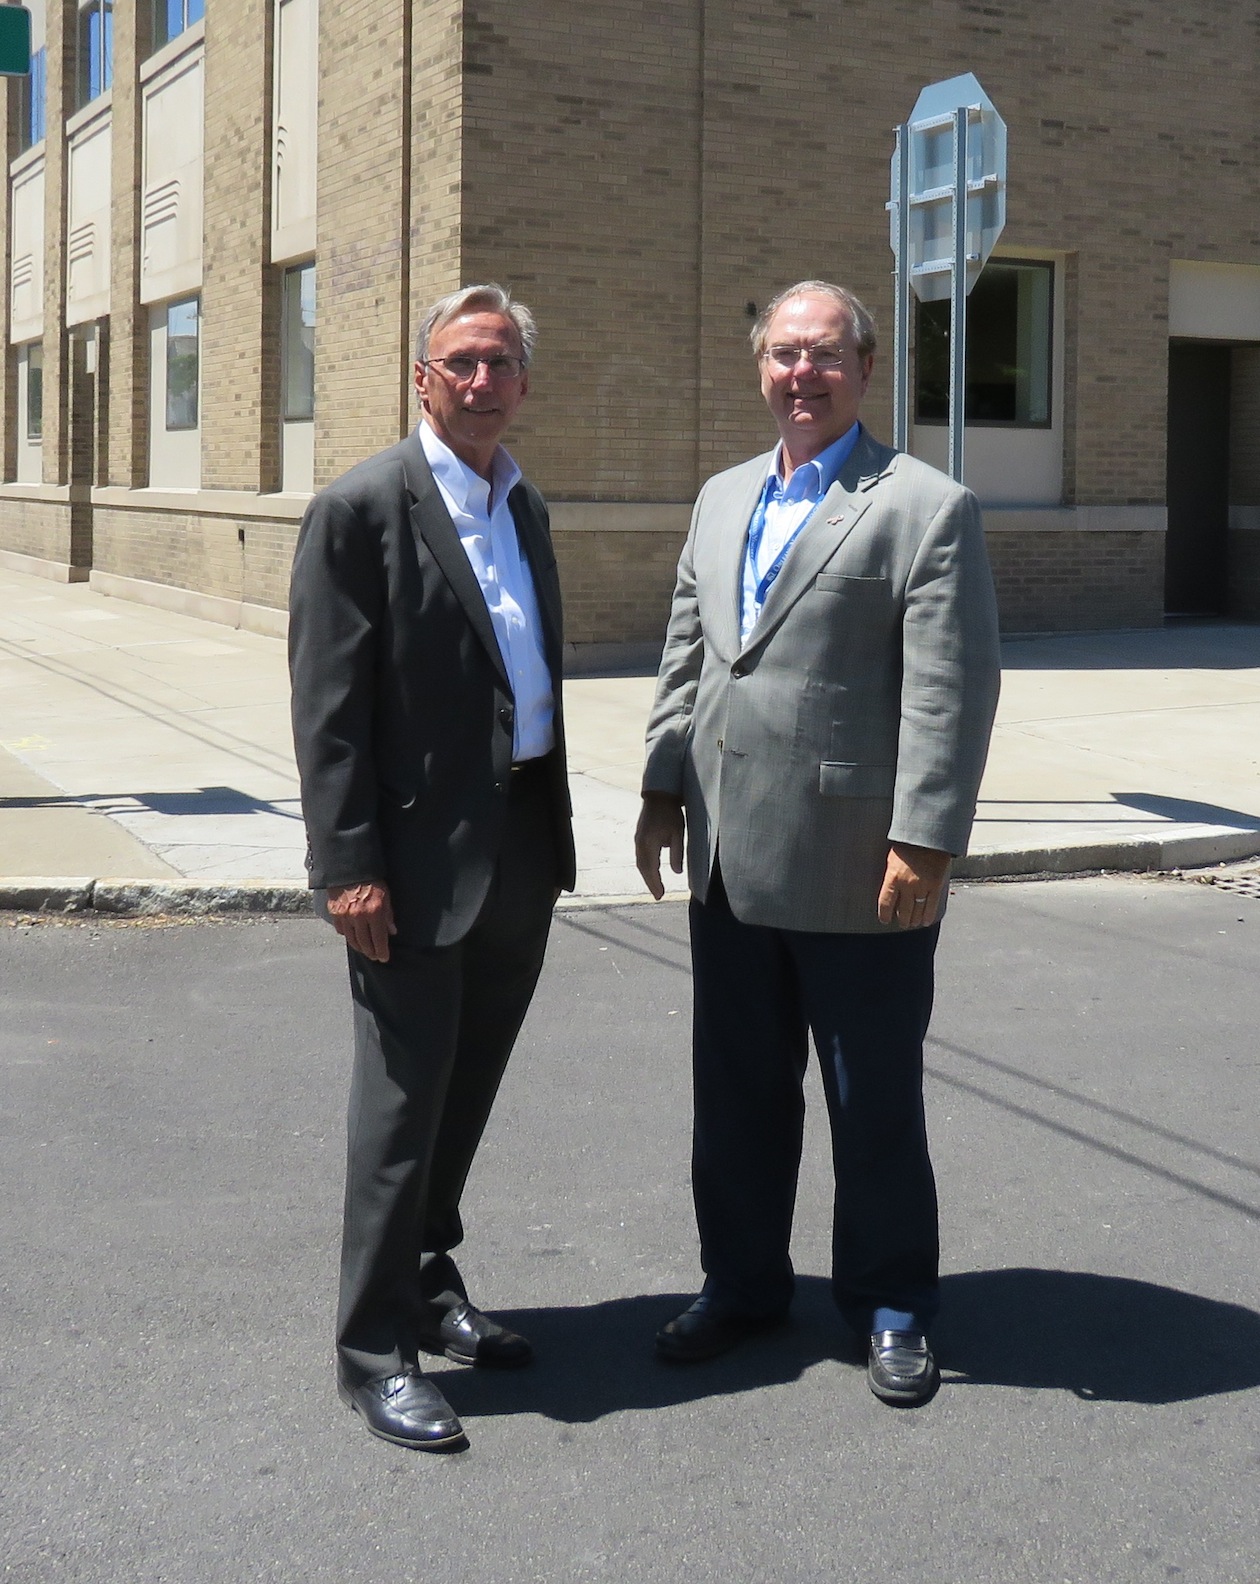 From left, Joe Steinmetz and Dr. Clark Godshall stand outside of the new center on the corner of 6th Street and Walnut Avenue. (Photos by David Yarger)